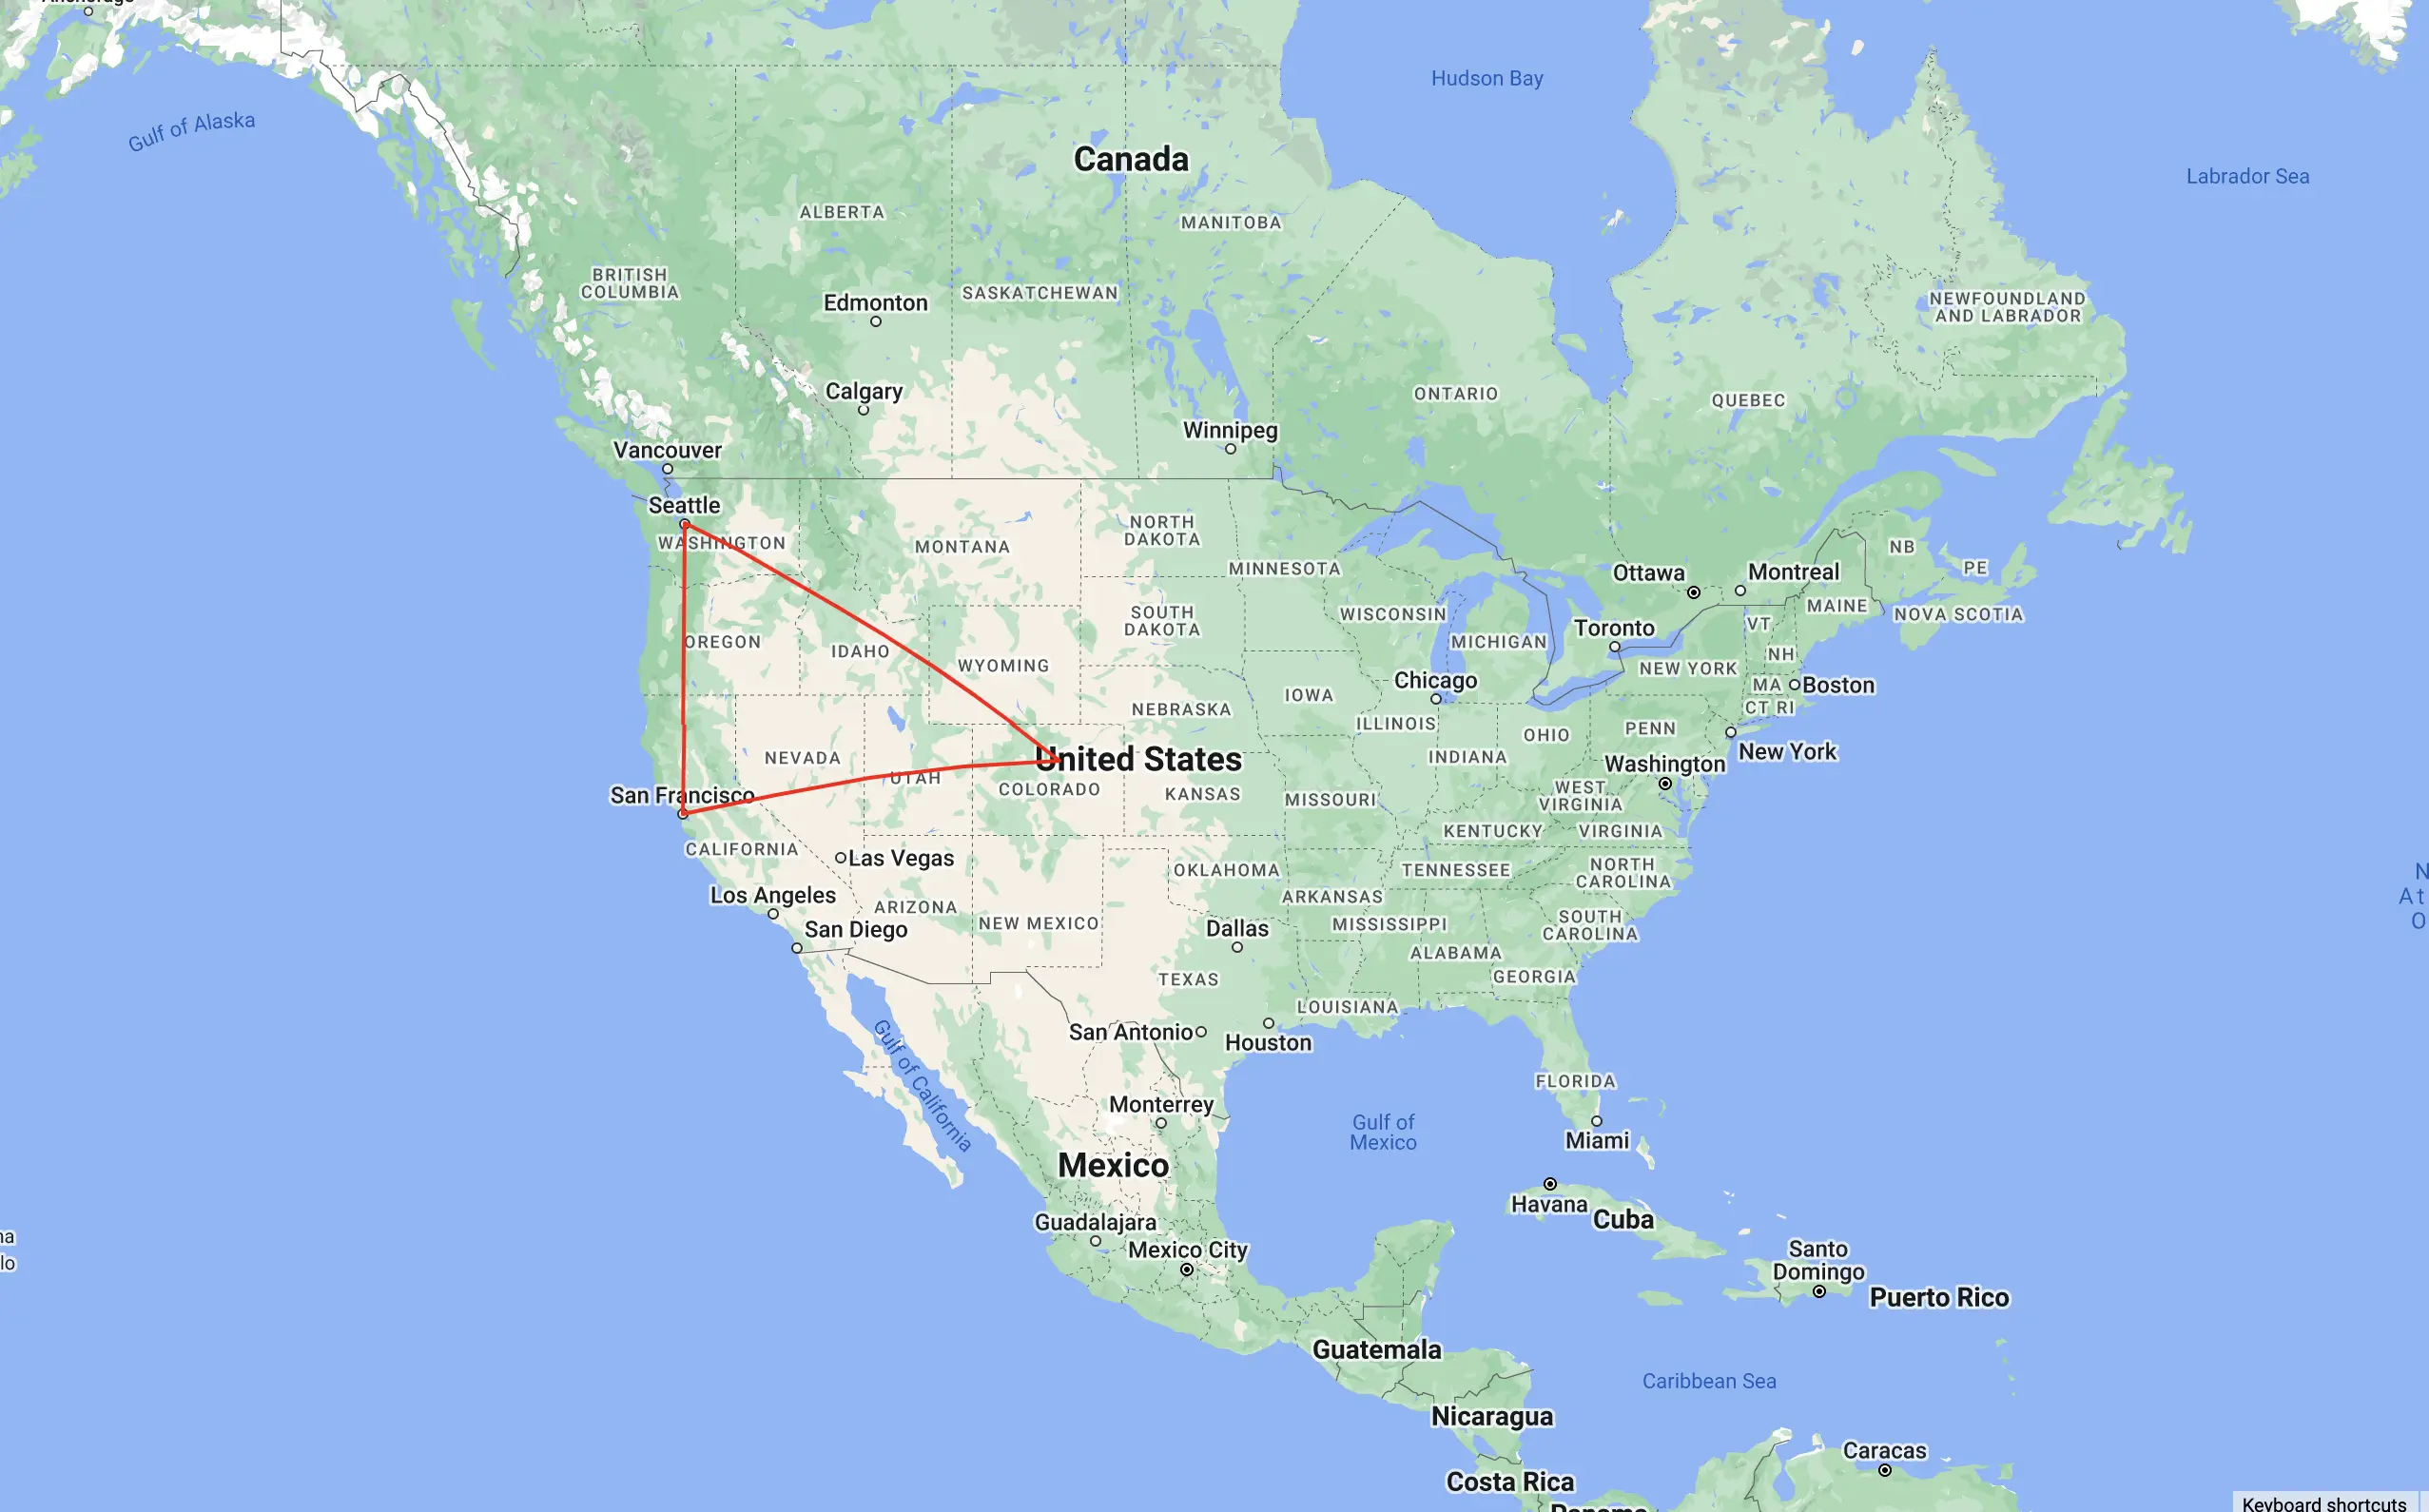 flight route from San Francisco to Seattle to Denver and back to San Francisco